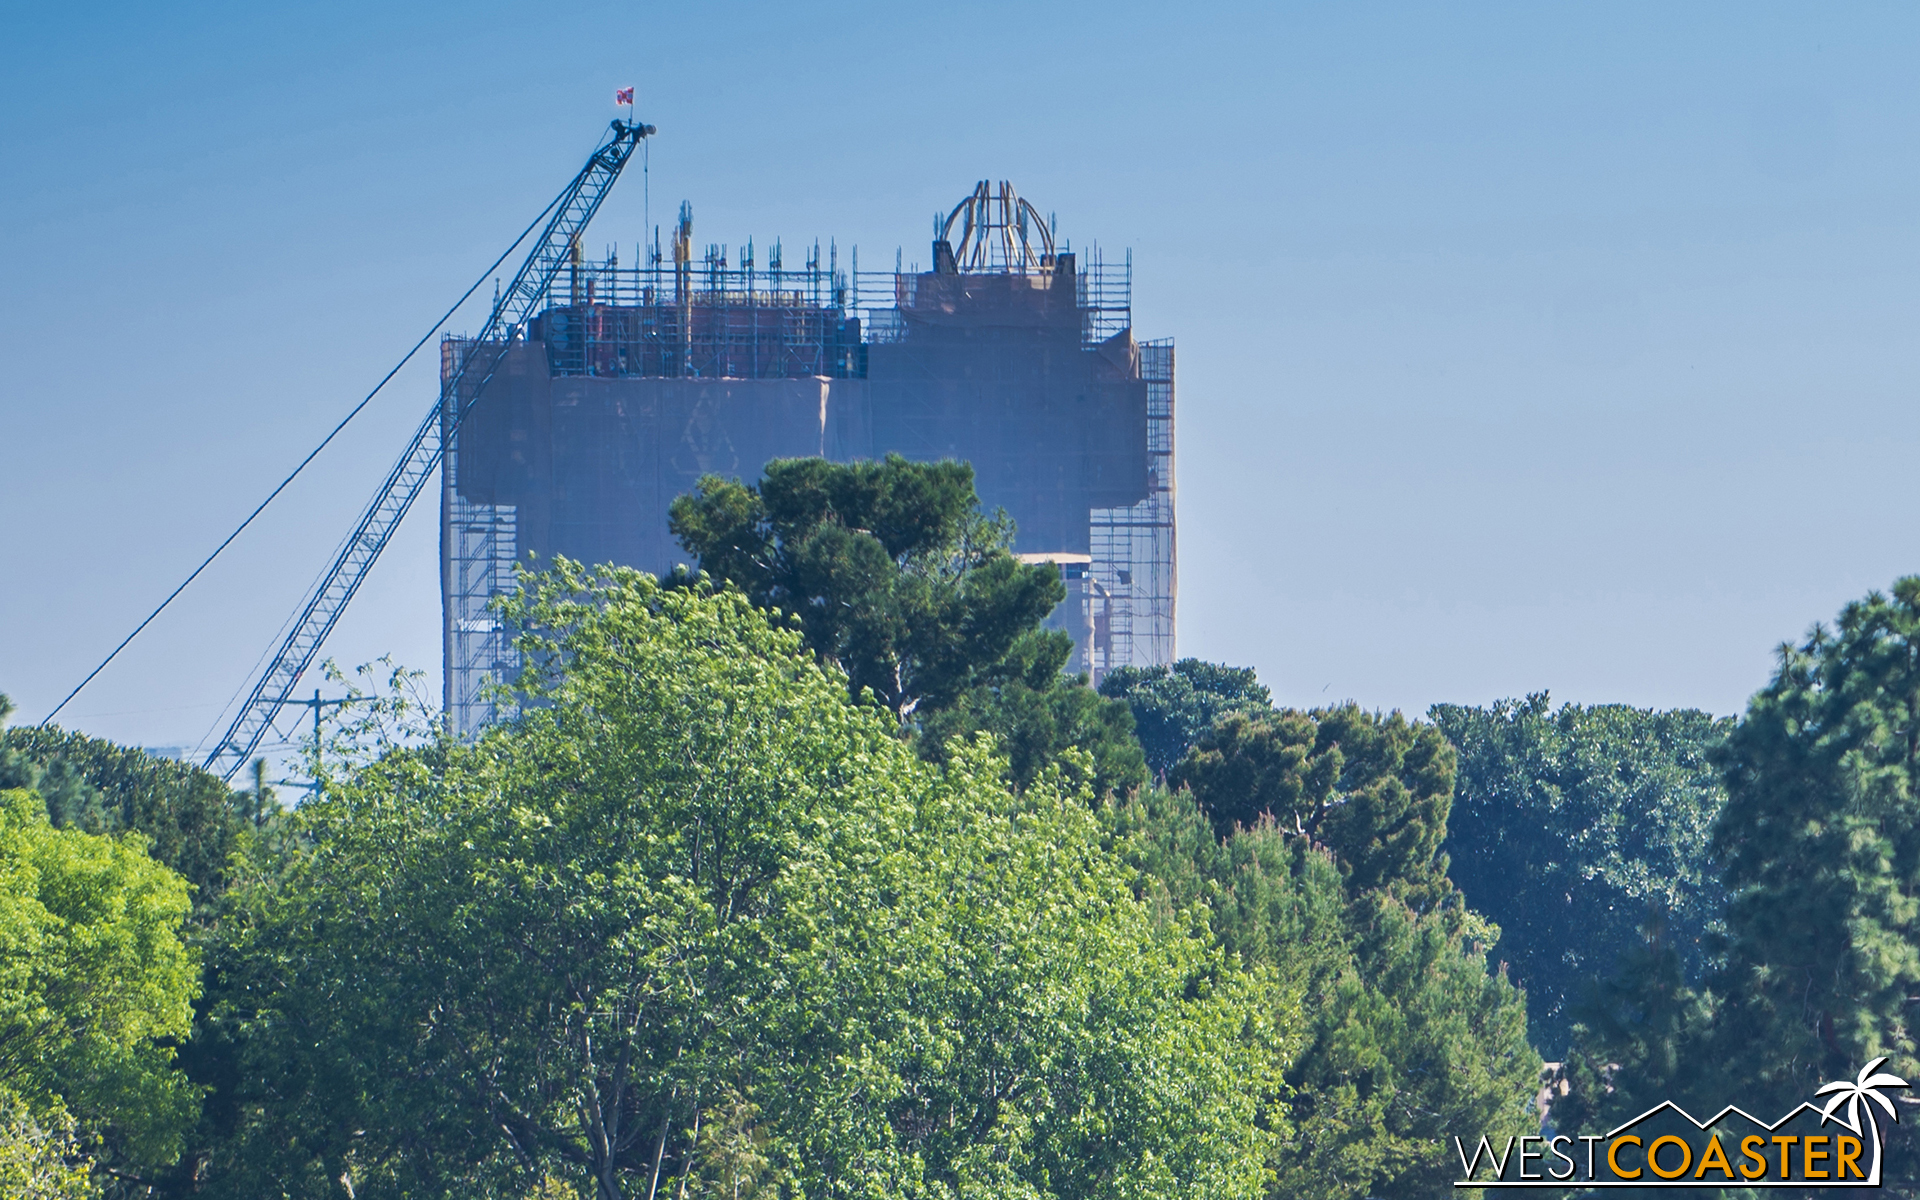  The under refurbishment NOT-Tower of Terror has been an ever looming presence during its makeover, but its exterior changes are starting to take shape. 